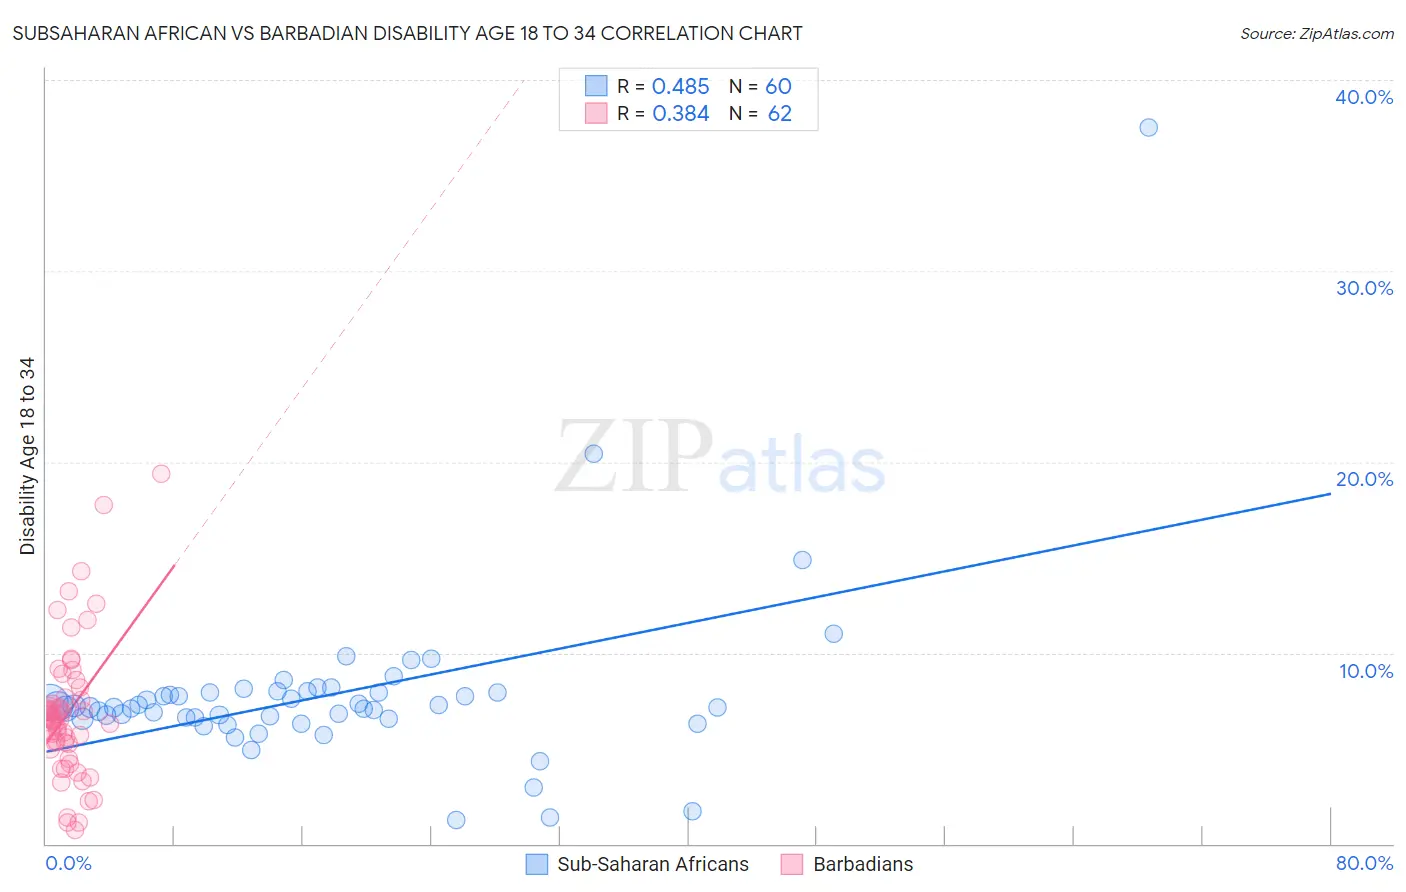 Subsaharan African vs Barbadian Disability Age 18 to 34